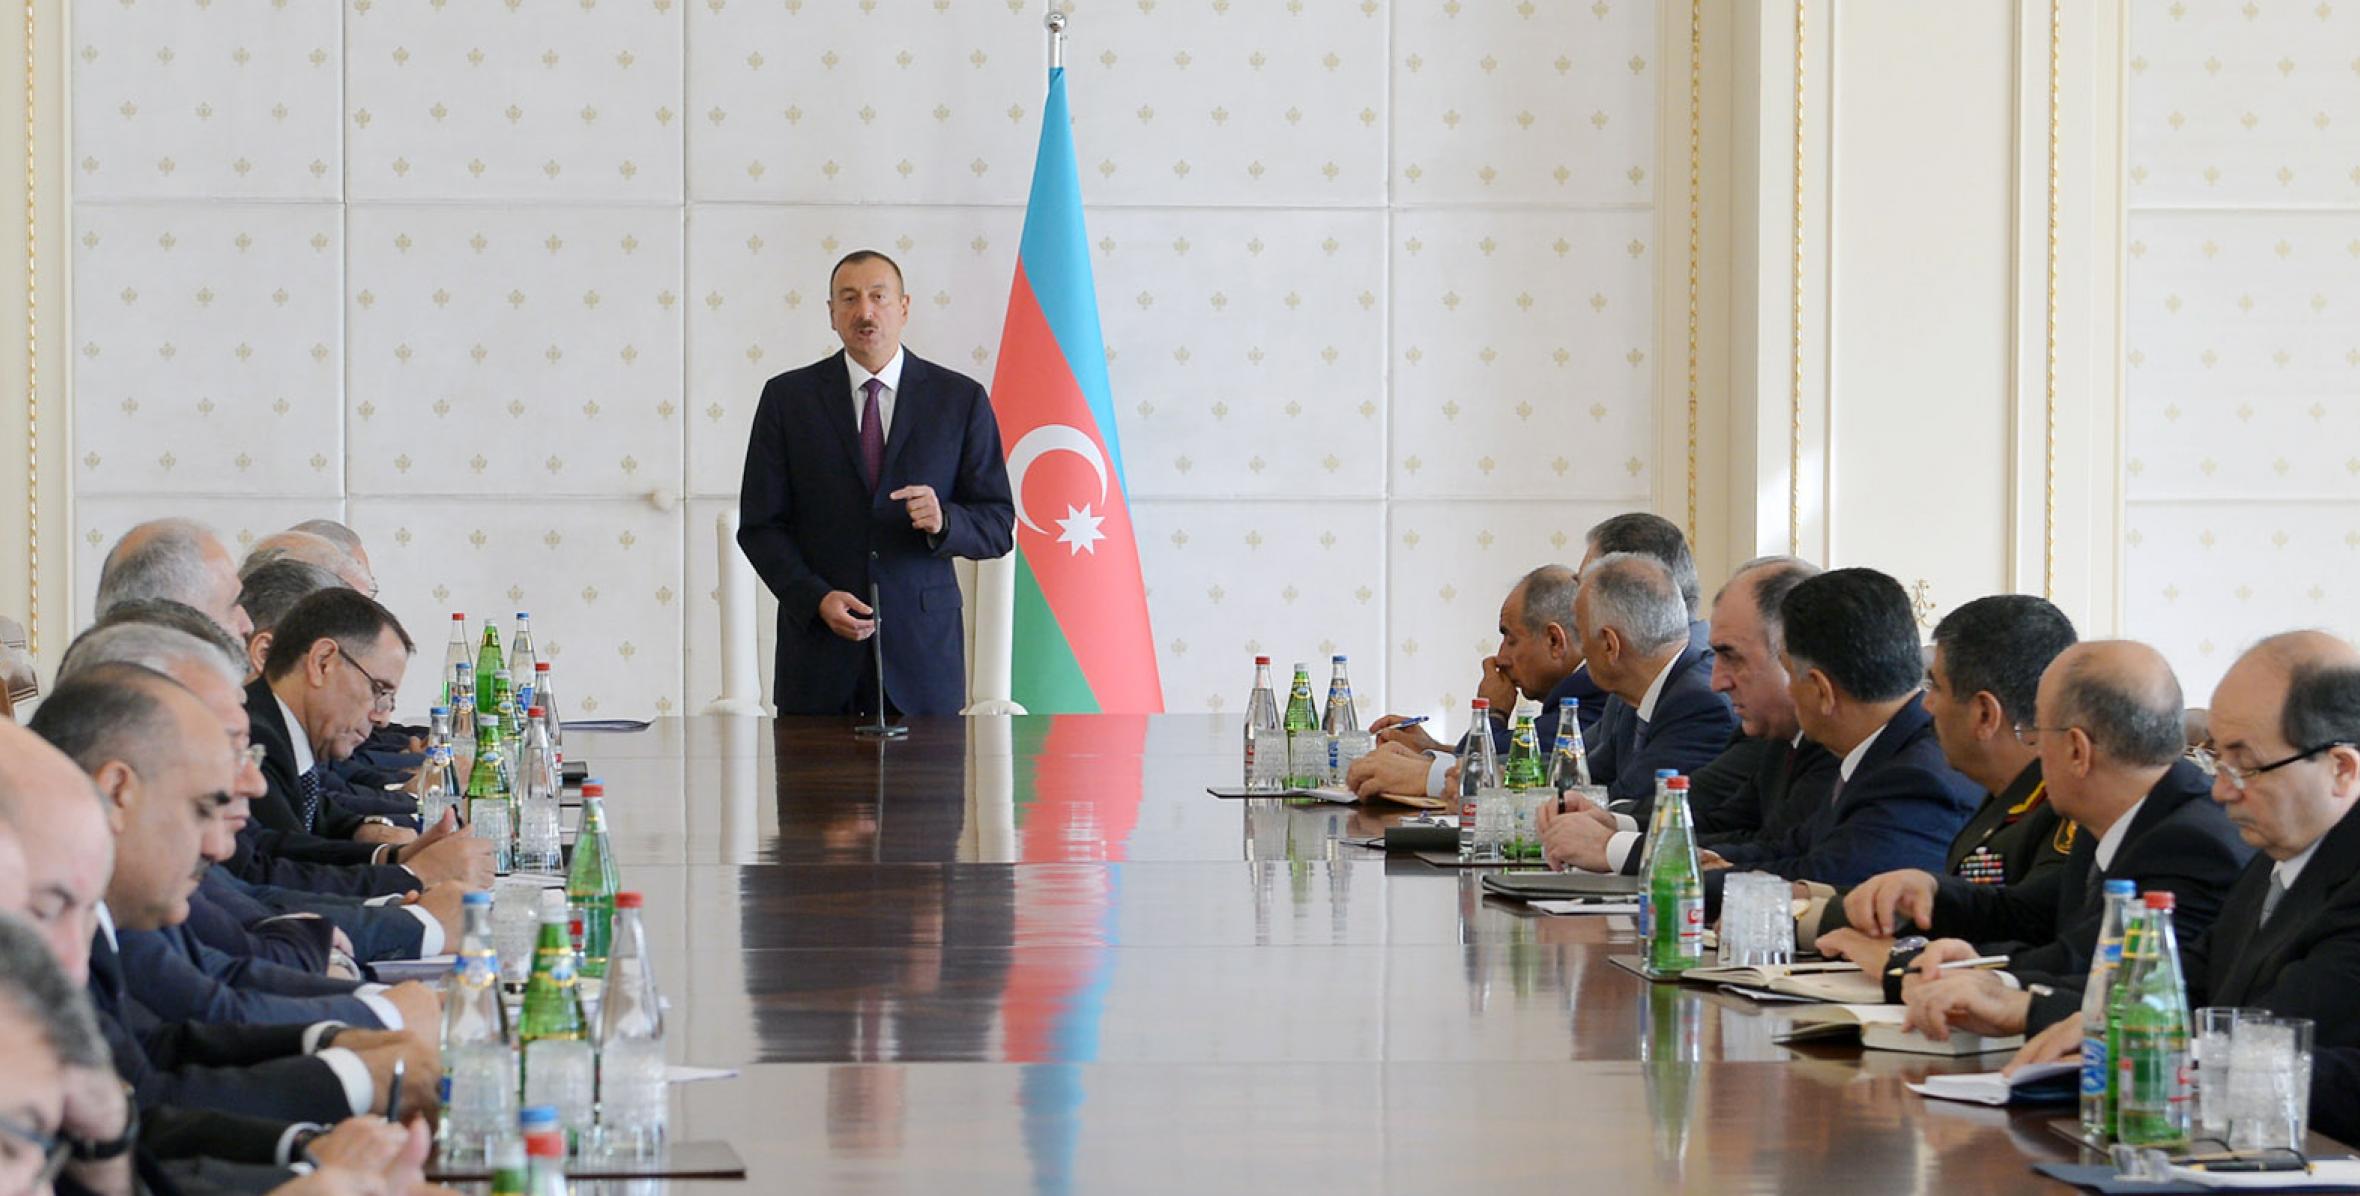 Opening speech by Ilham Aliyev at the meeting of the Cabinet of Ministers dedicated to the results of socioeconomic development in the first half of 2014 and objectives for the future